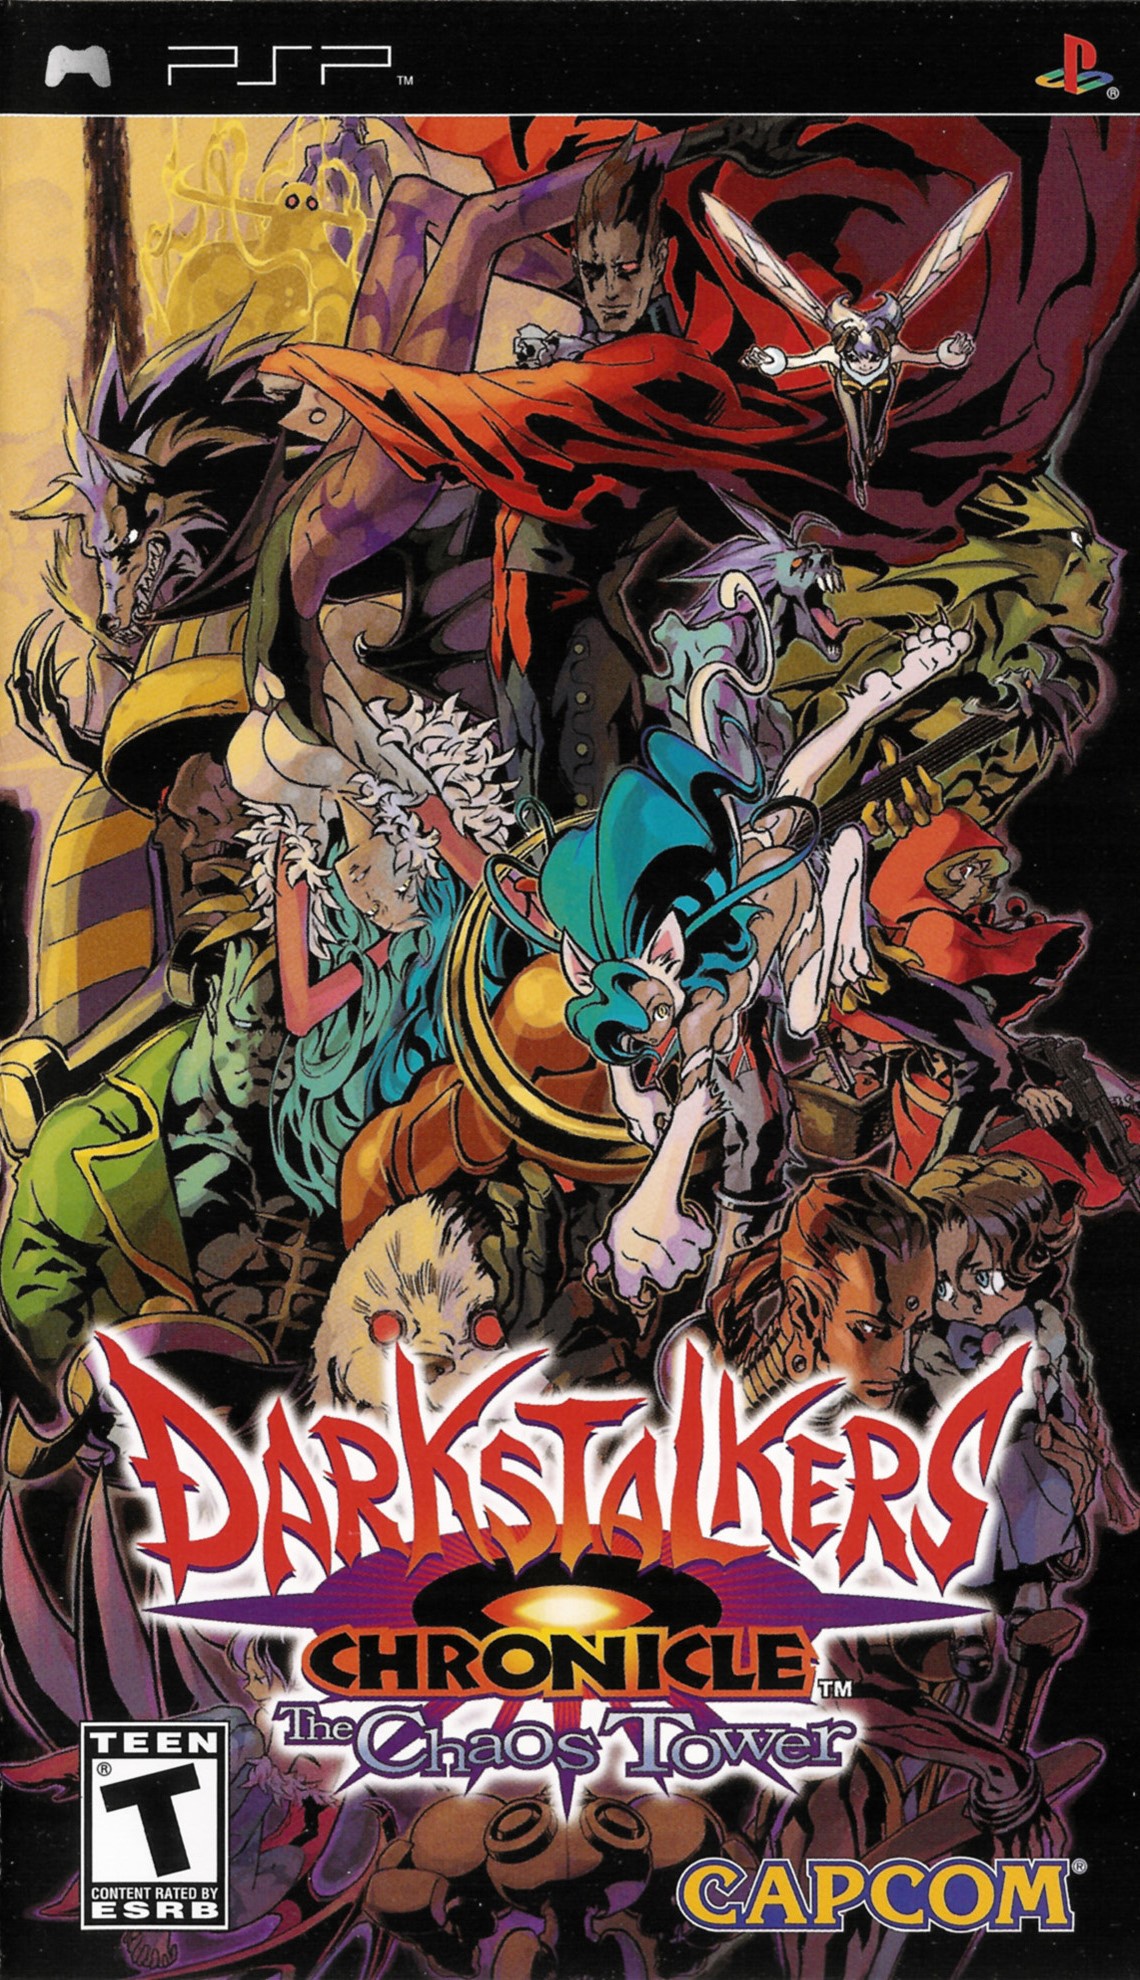 'Dark Stalkers: The Chaos Tower'